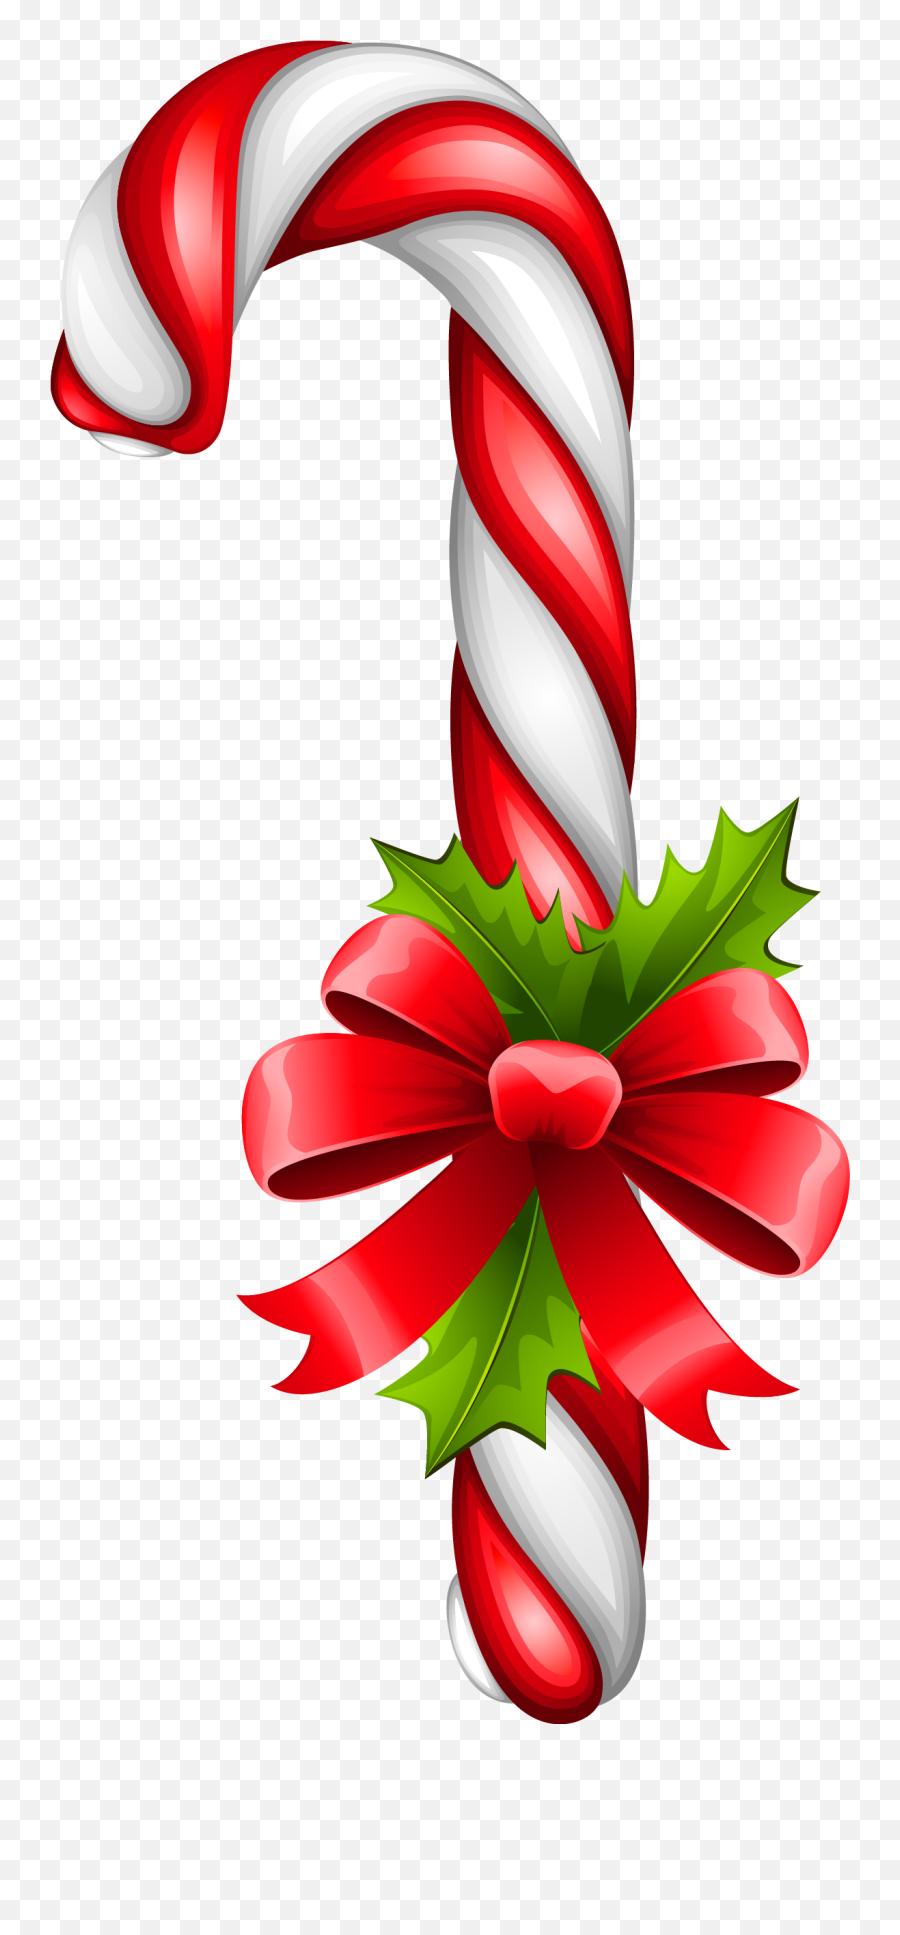 Candy Cane Christmas Clip Art - Christmas Candy Cane Transparent Png,Candy Cane Border Png